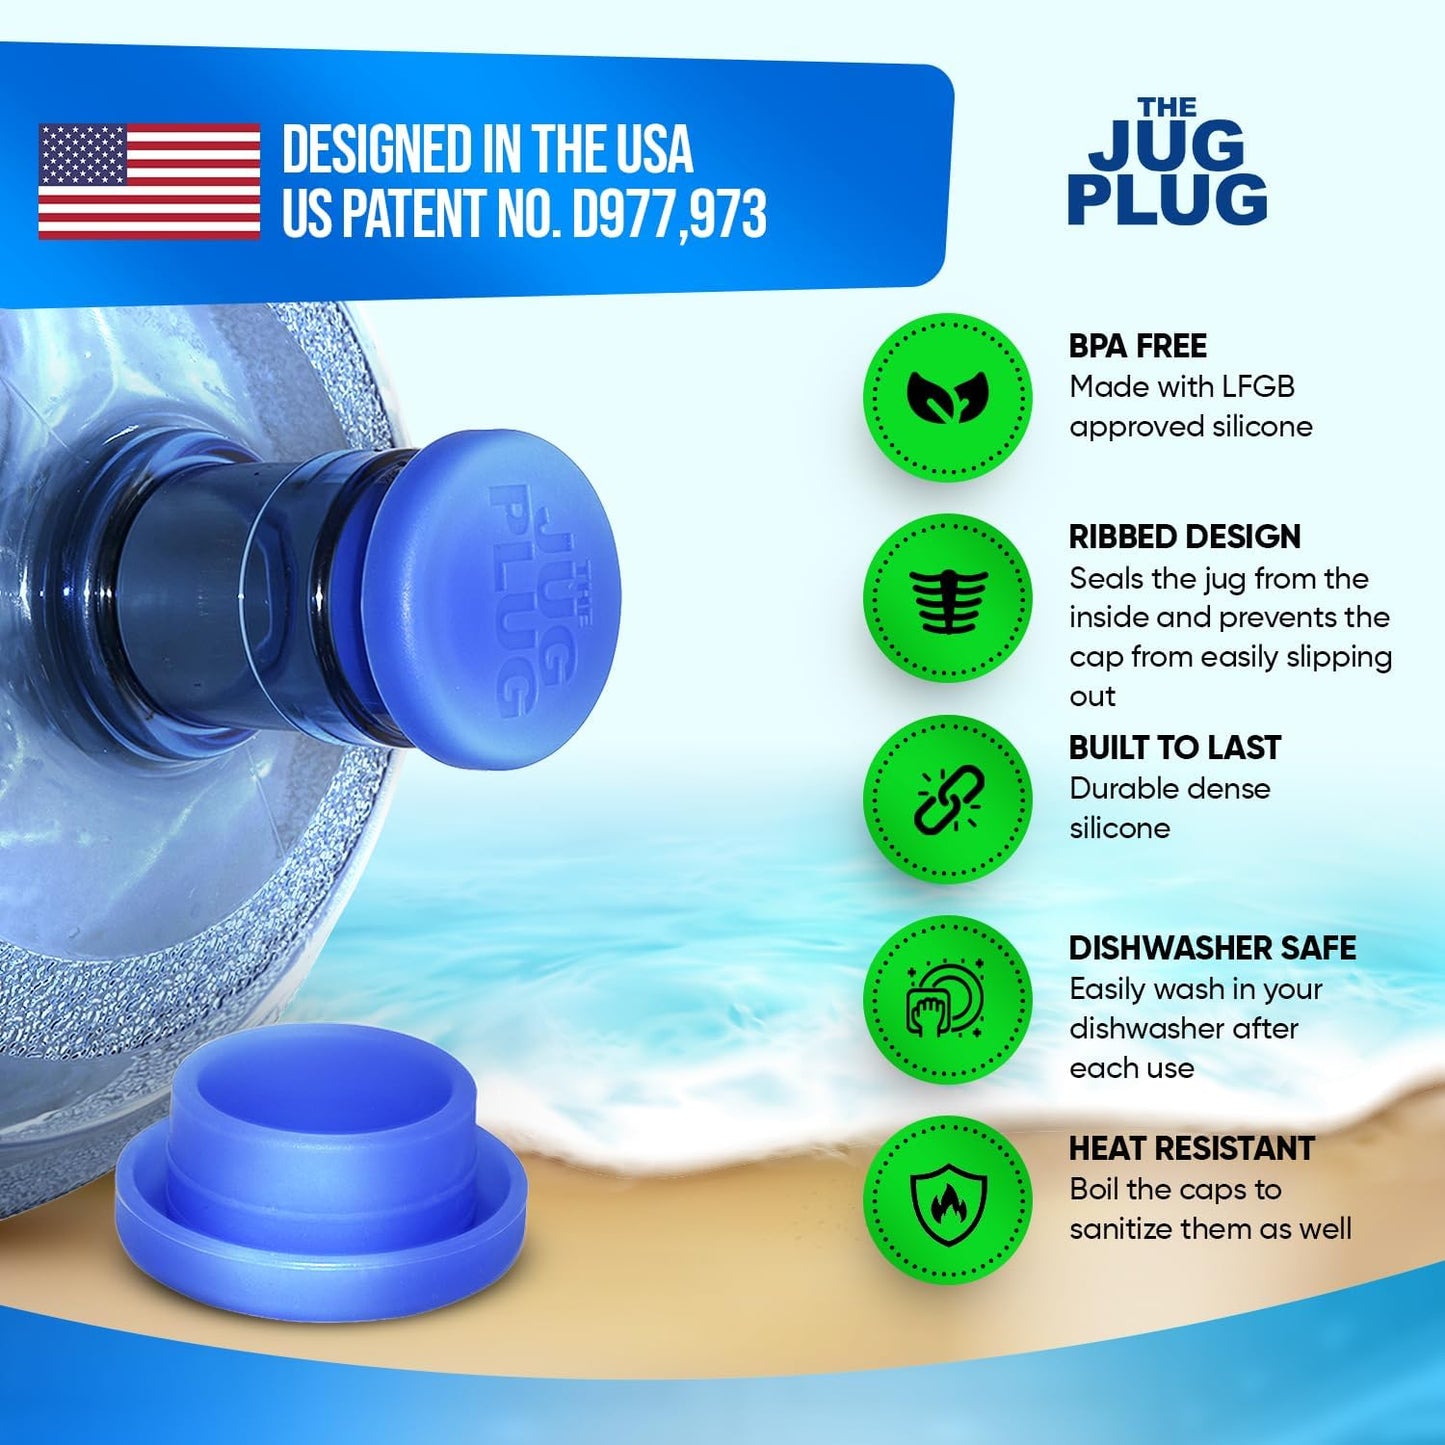 The Jug Plug Original 5 Gallon Water Jug Cap Reusable - No Spill Silicone 3 & 5 Gallon Water Jug Lid Fits 55Mm Bottles - Easy-To-Use, Leak-Proof 3 & 5 Gal Water Jug Cap Replacement Cover - 3 Pack